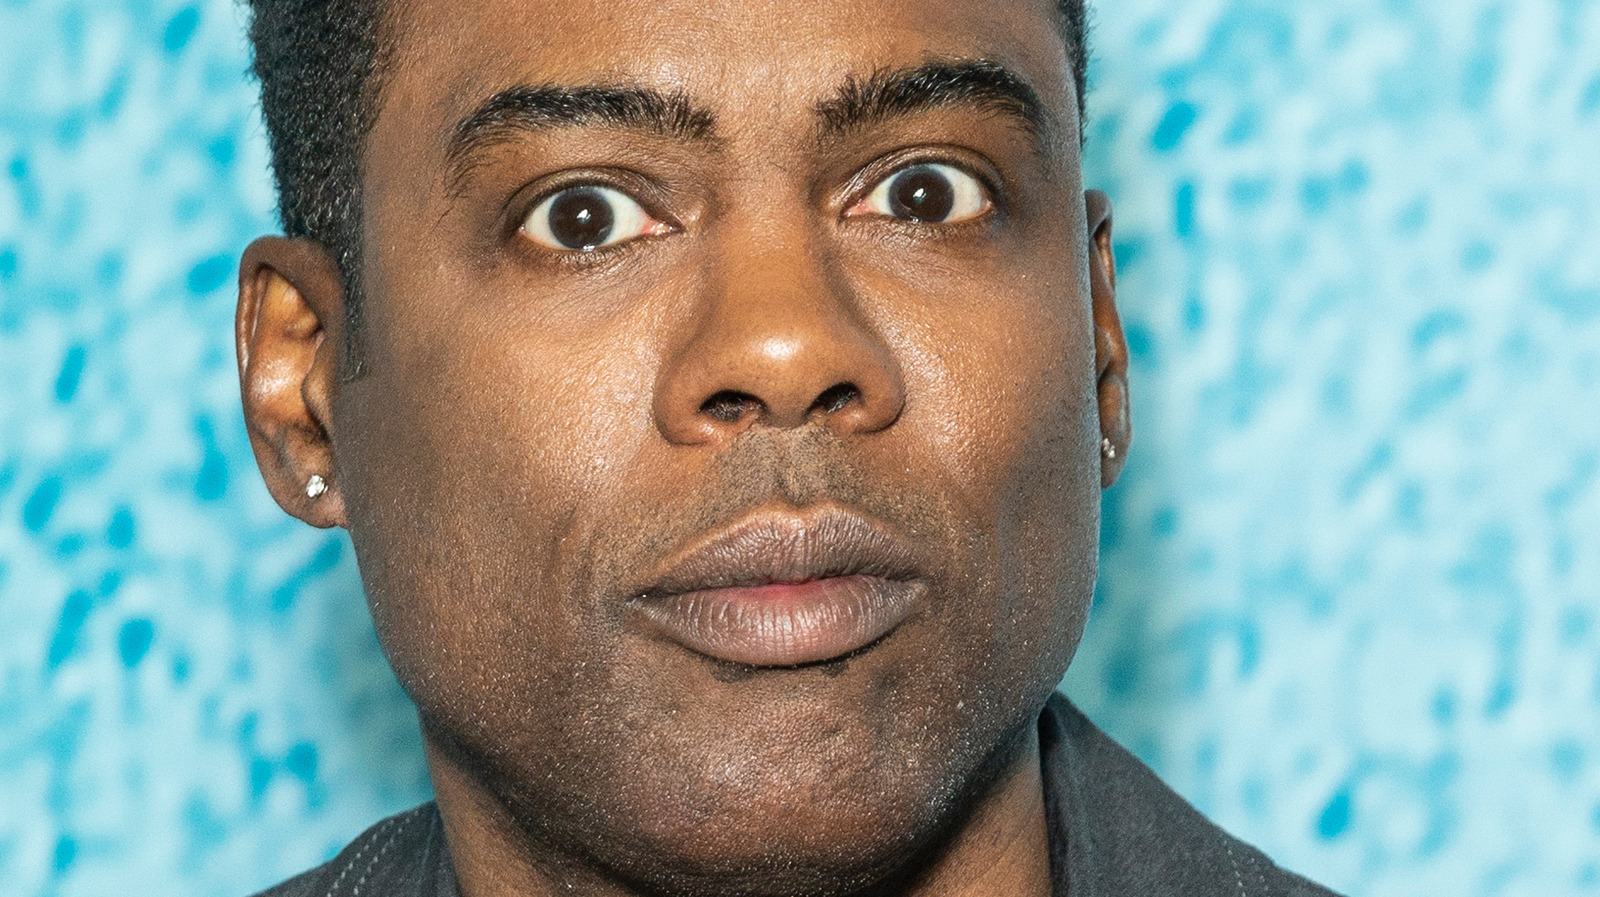 Chris Rock Got Painfully Real About His Past Experience With Bullying